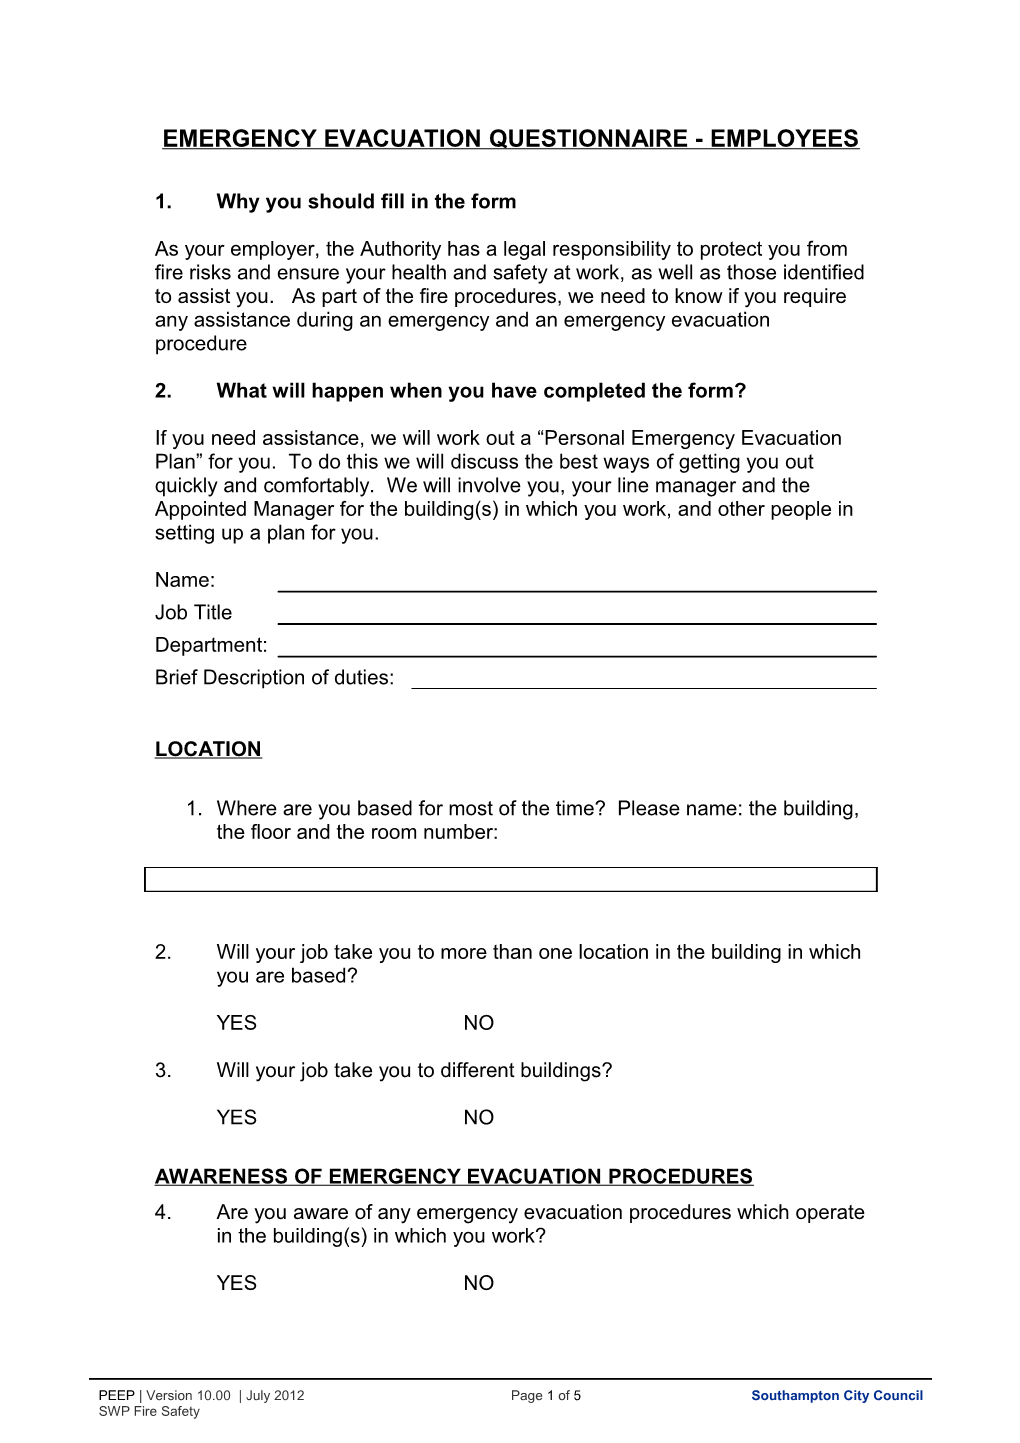 Emergency Evacuation Questionnaire - Employees